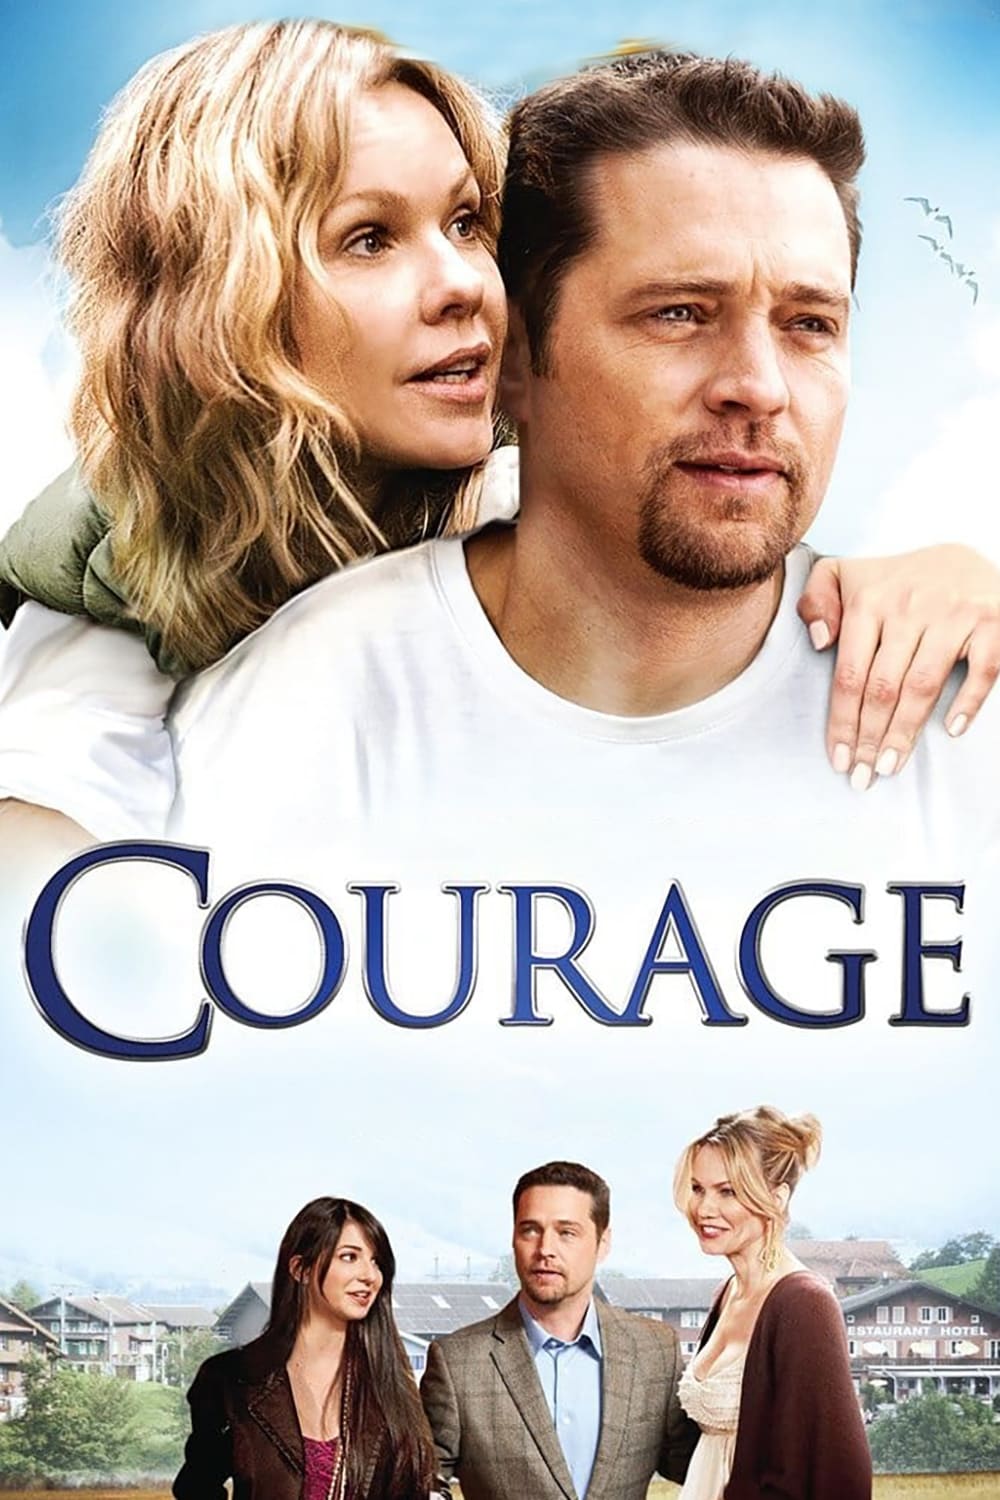 Courage (2009)